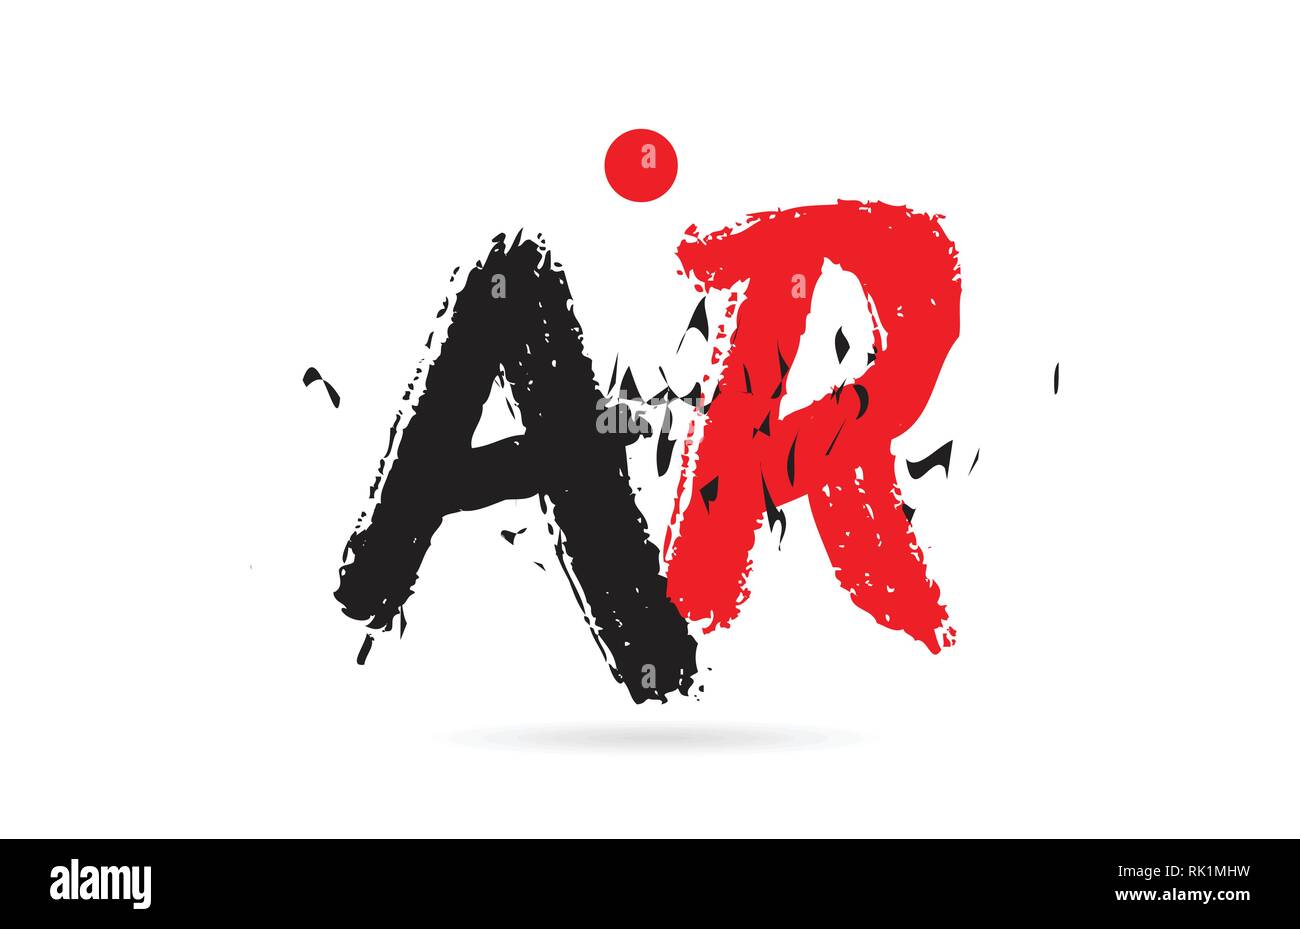 Design of alphabet letter combination AR A R with grunge texture and black red color suitable as a logo for a company or business Stock Vector